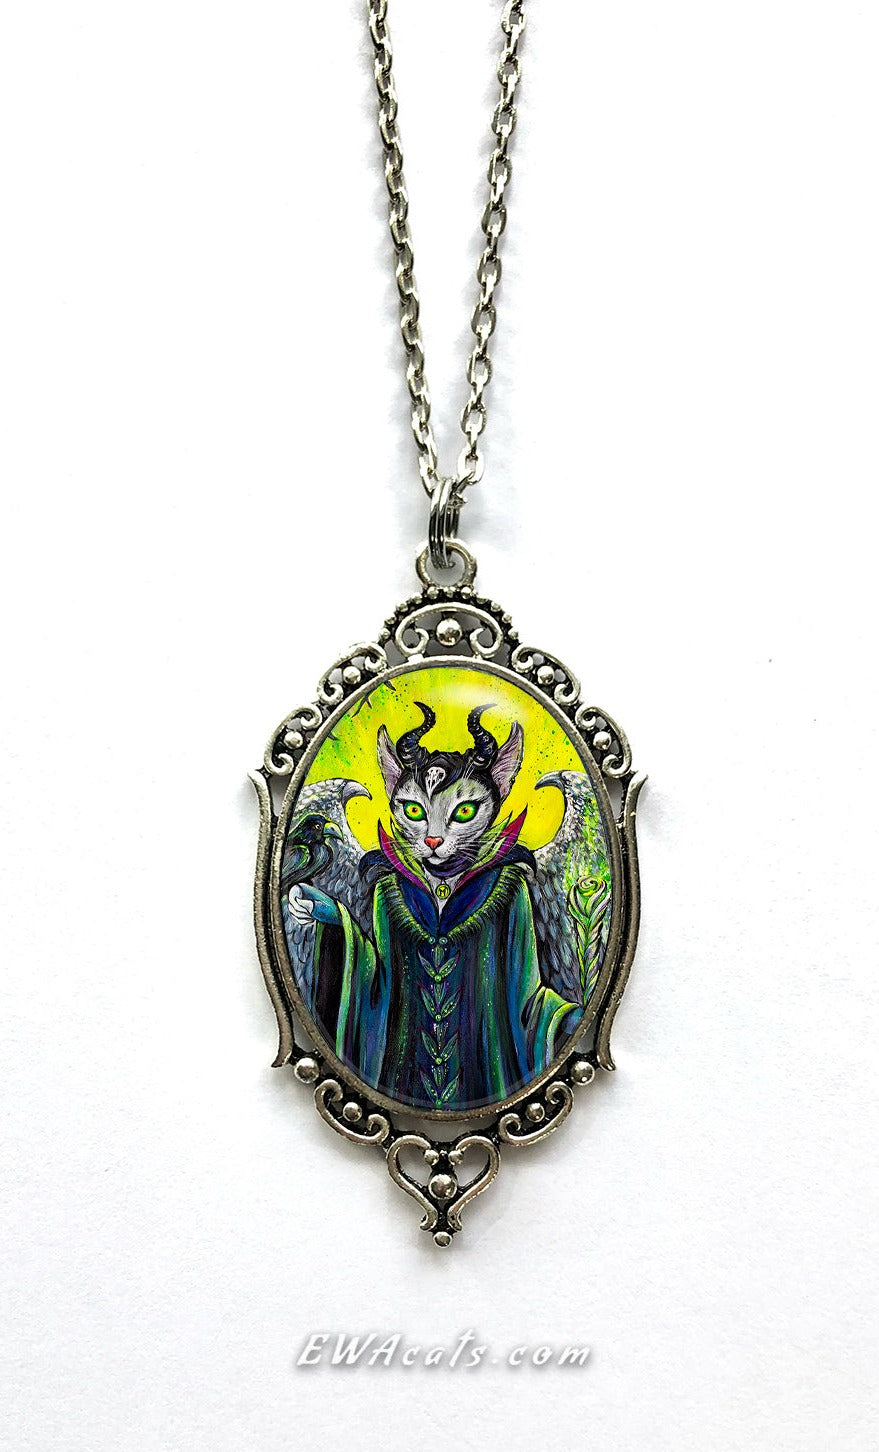 Necklace "Meowlificent"